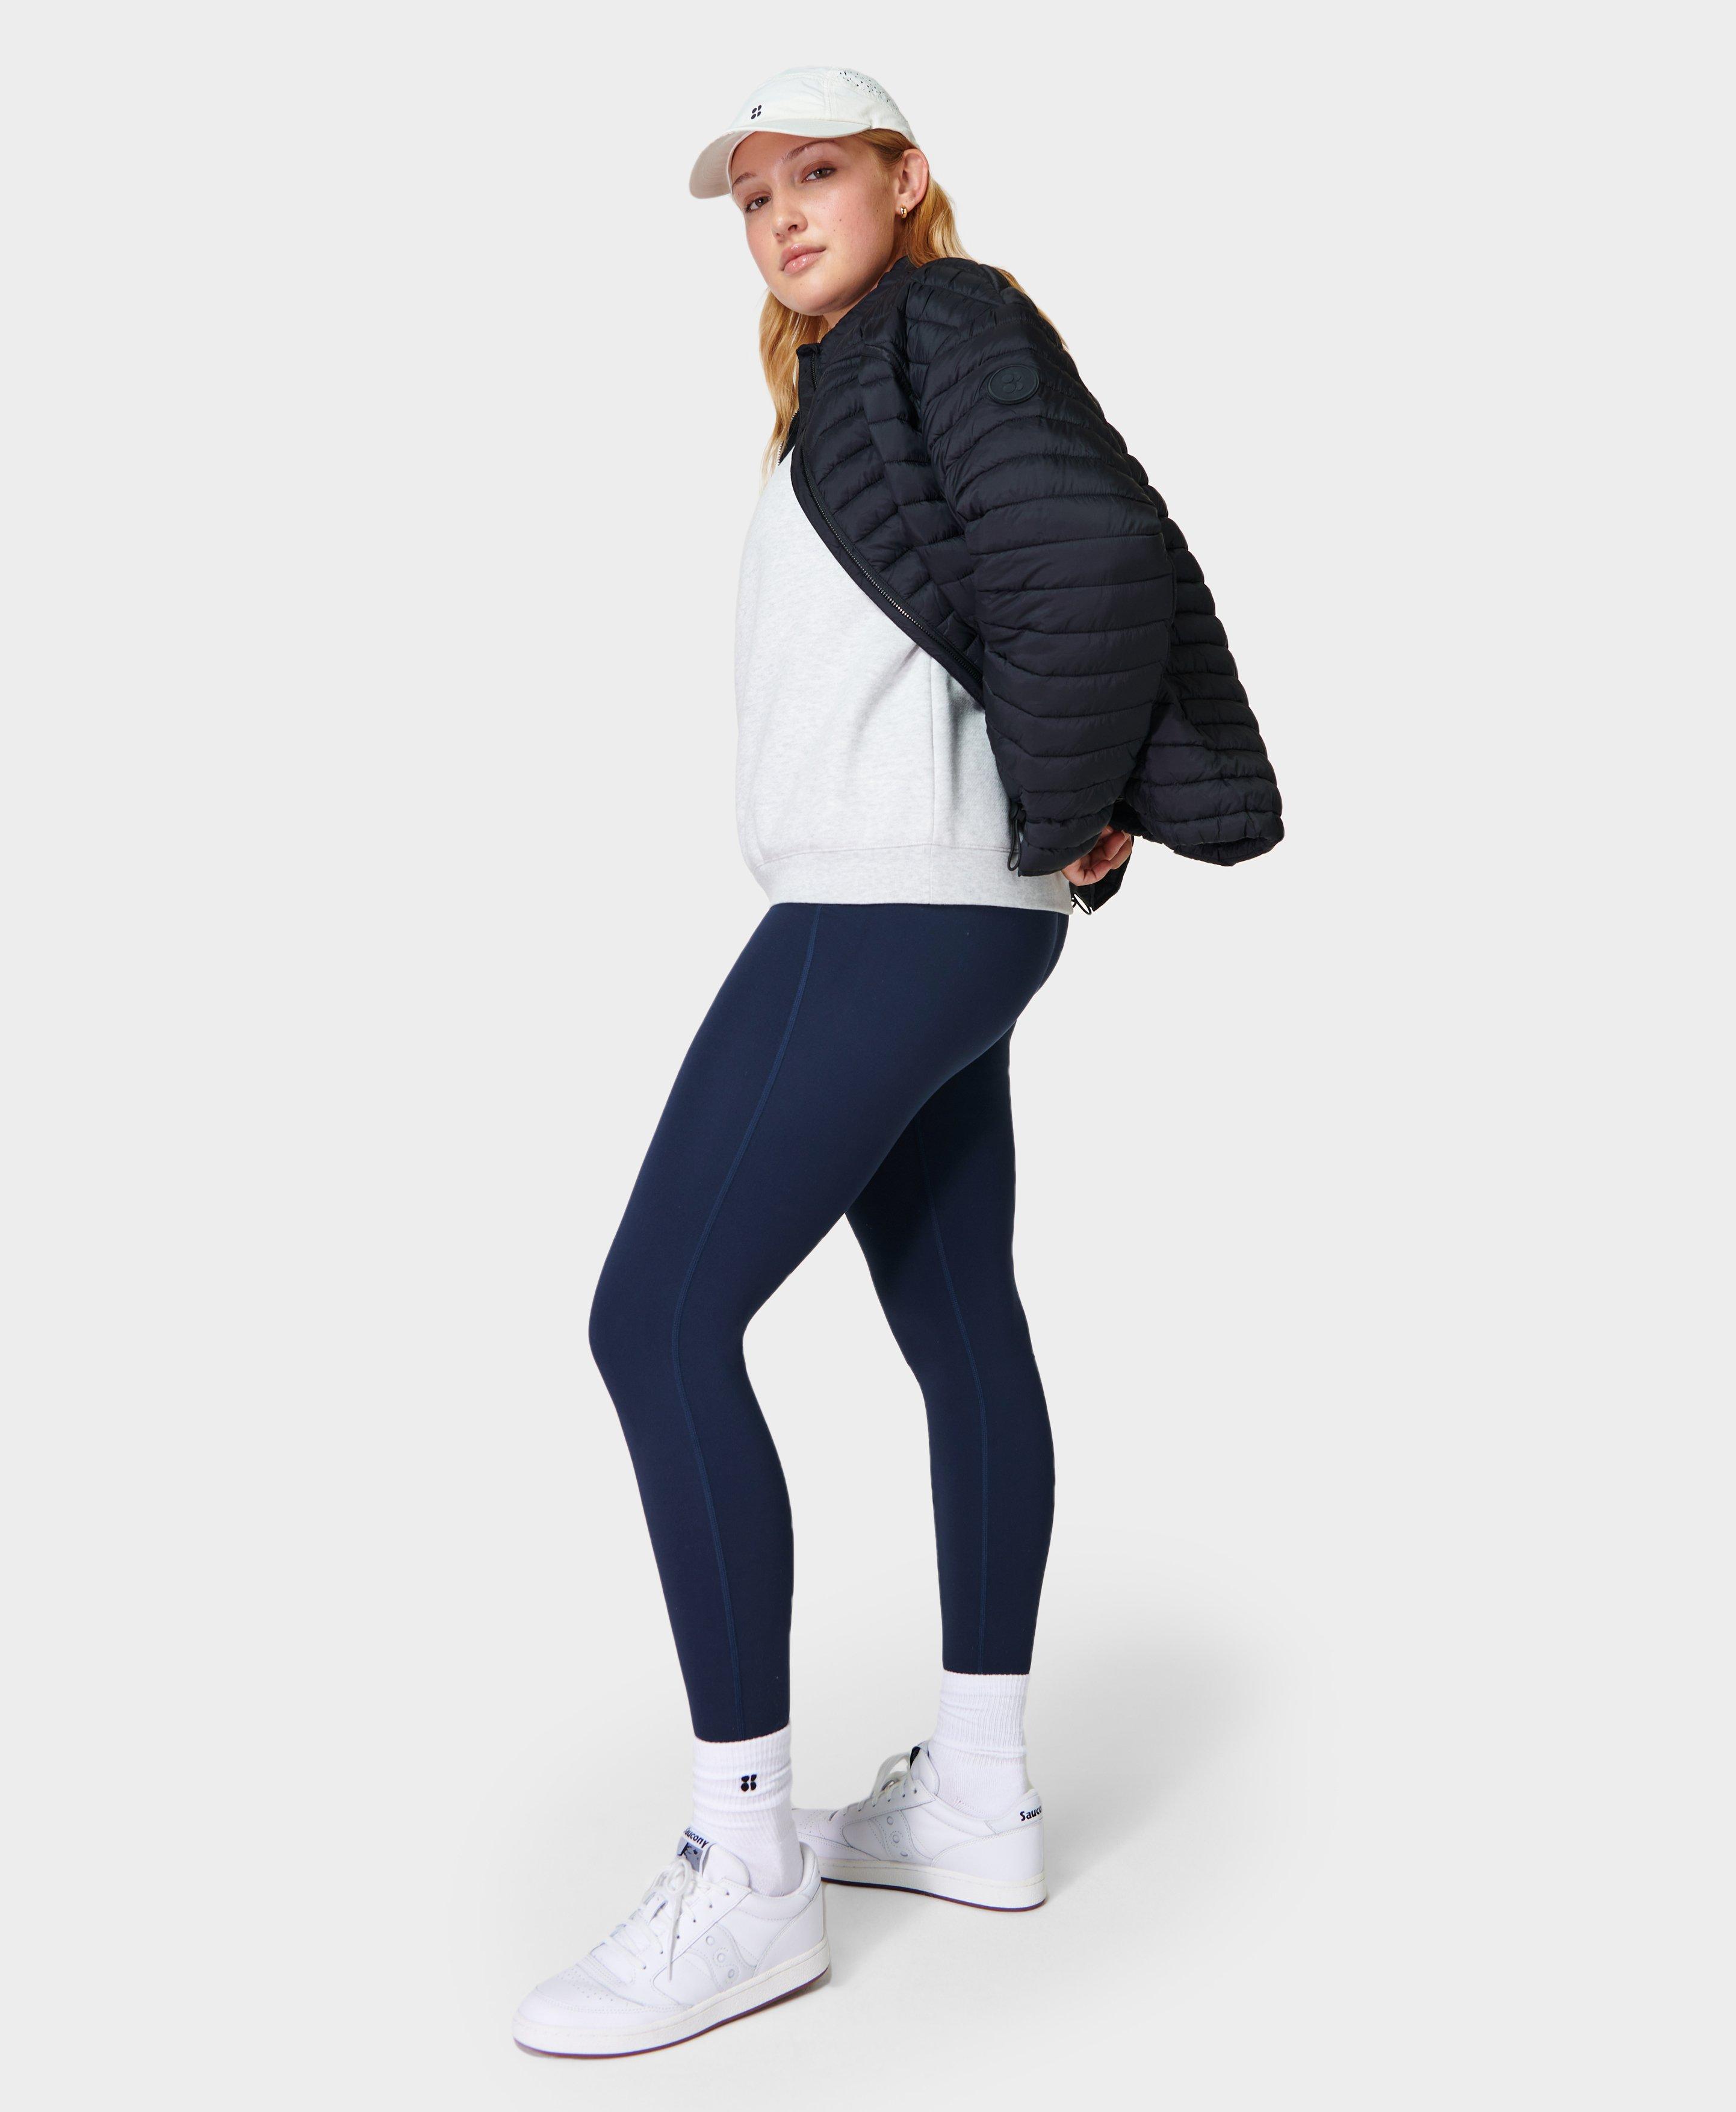 Sweaty Betty All Day Embossed Leggings, Blue Textured at John